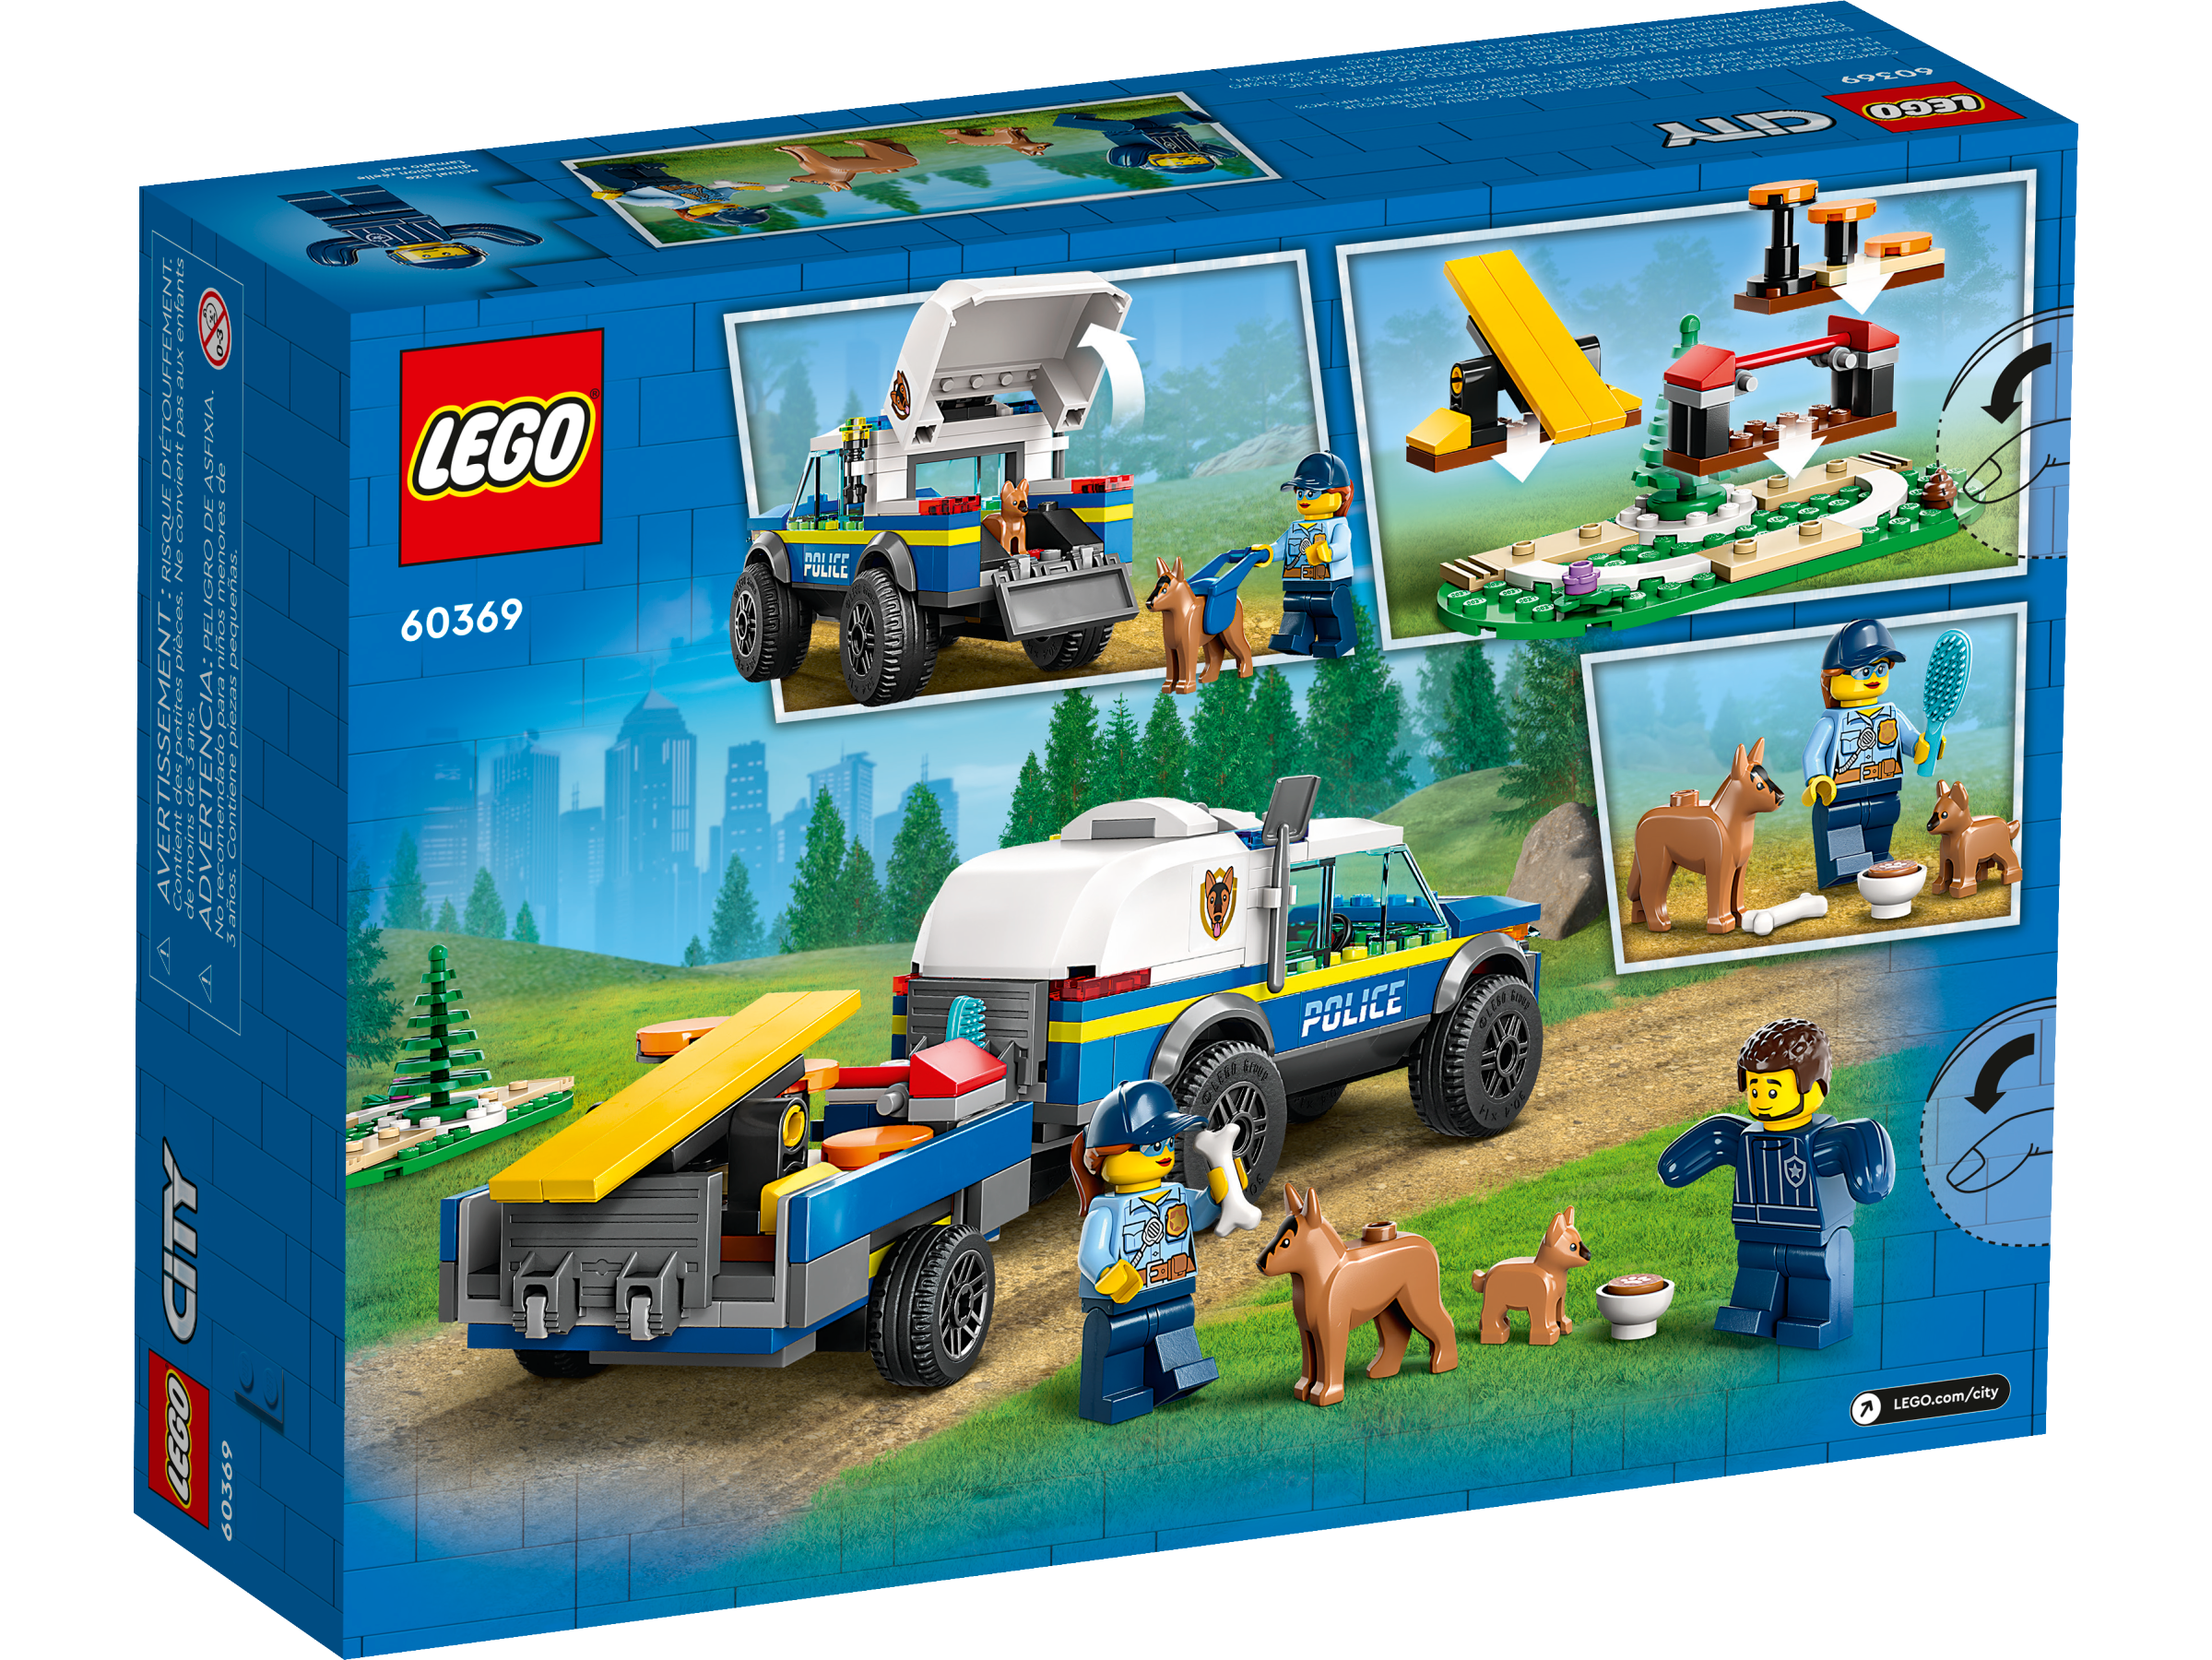 Mobile Police Dog Training 60369 | City | Buy online at the Official LEGO®  Shop US